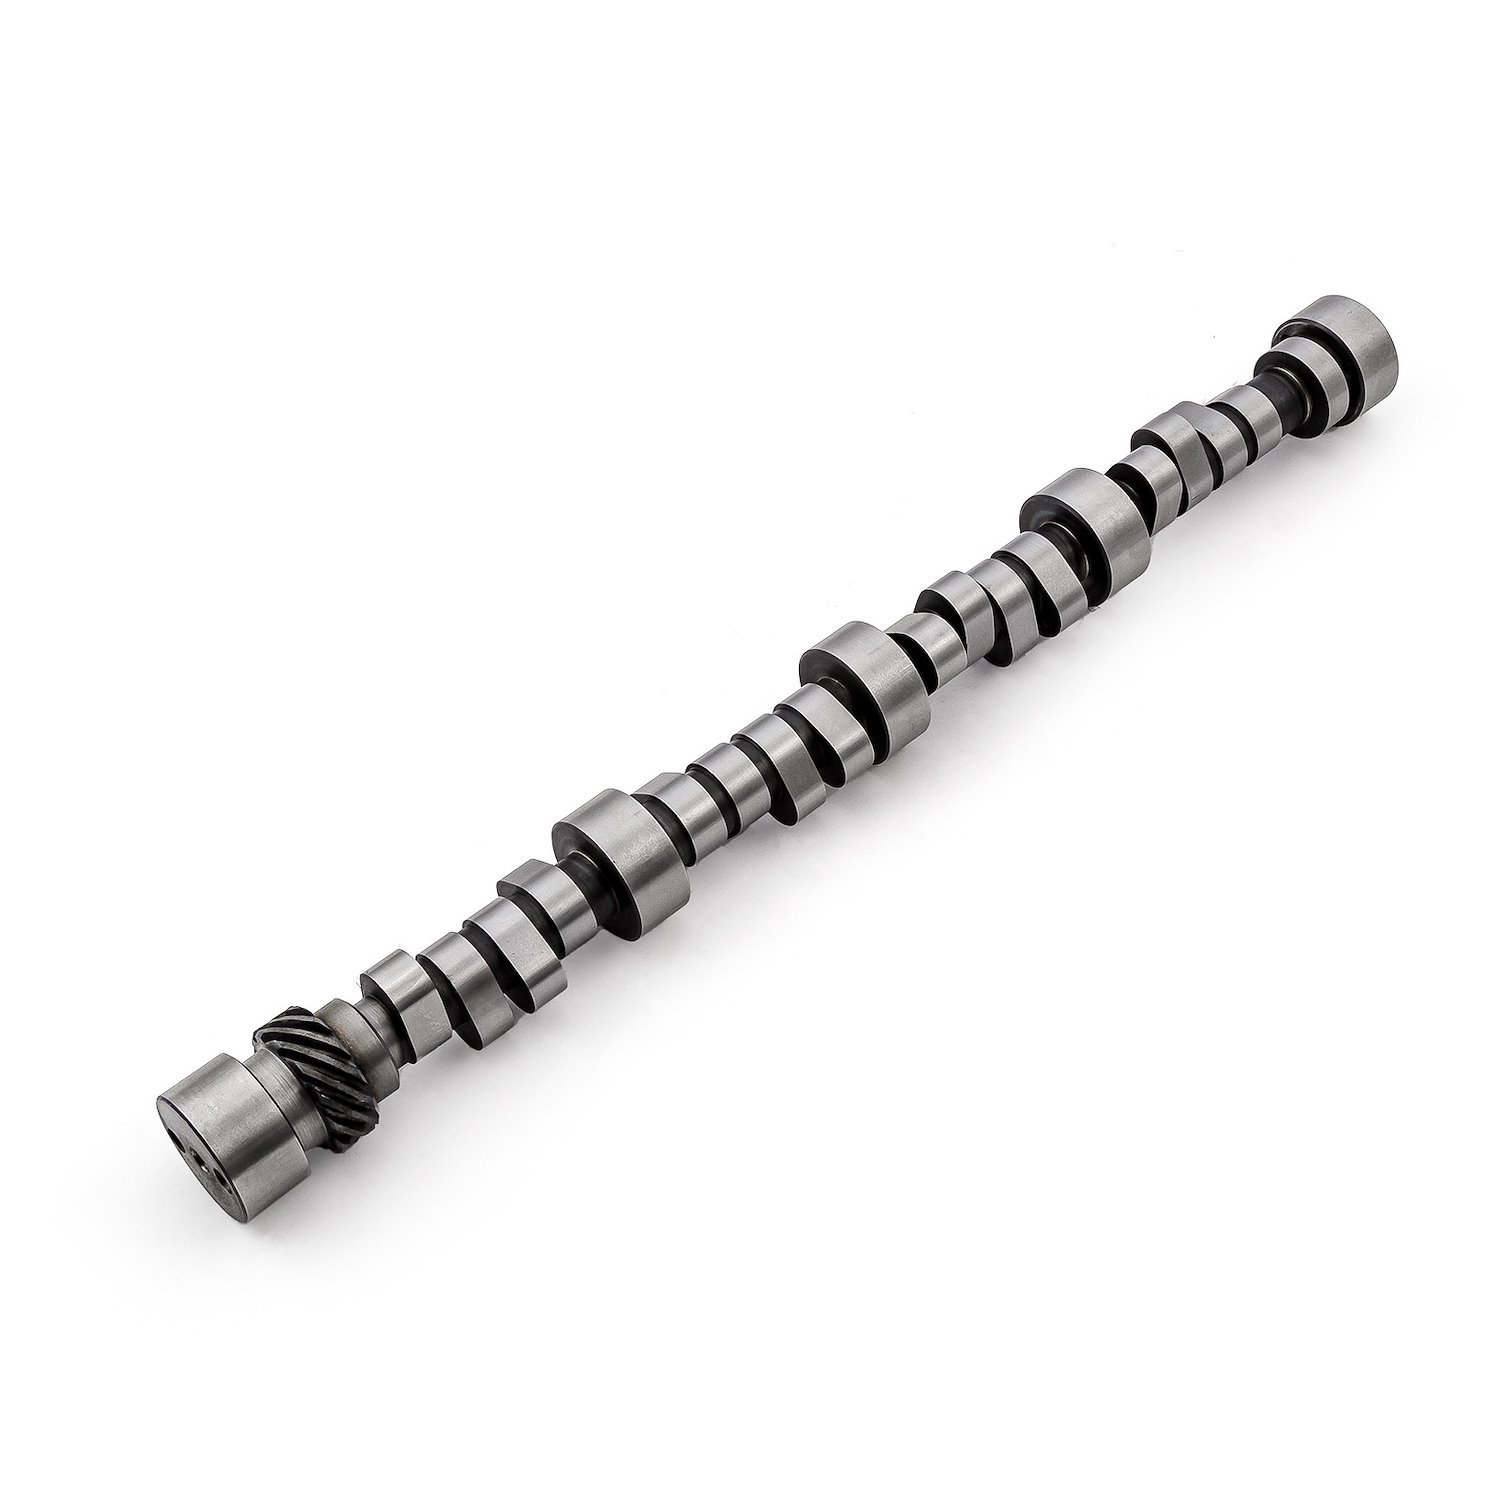 Chevy SBC 350 Hydraulic Roller Camshaft 294 Int. 300 Exh. Duration